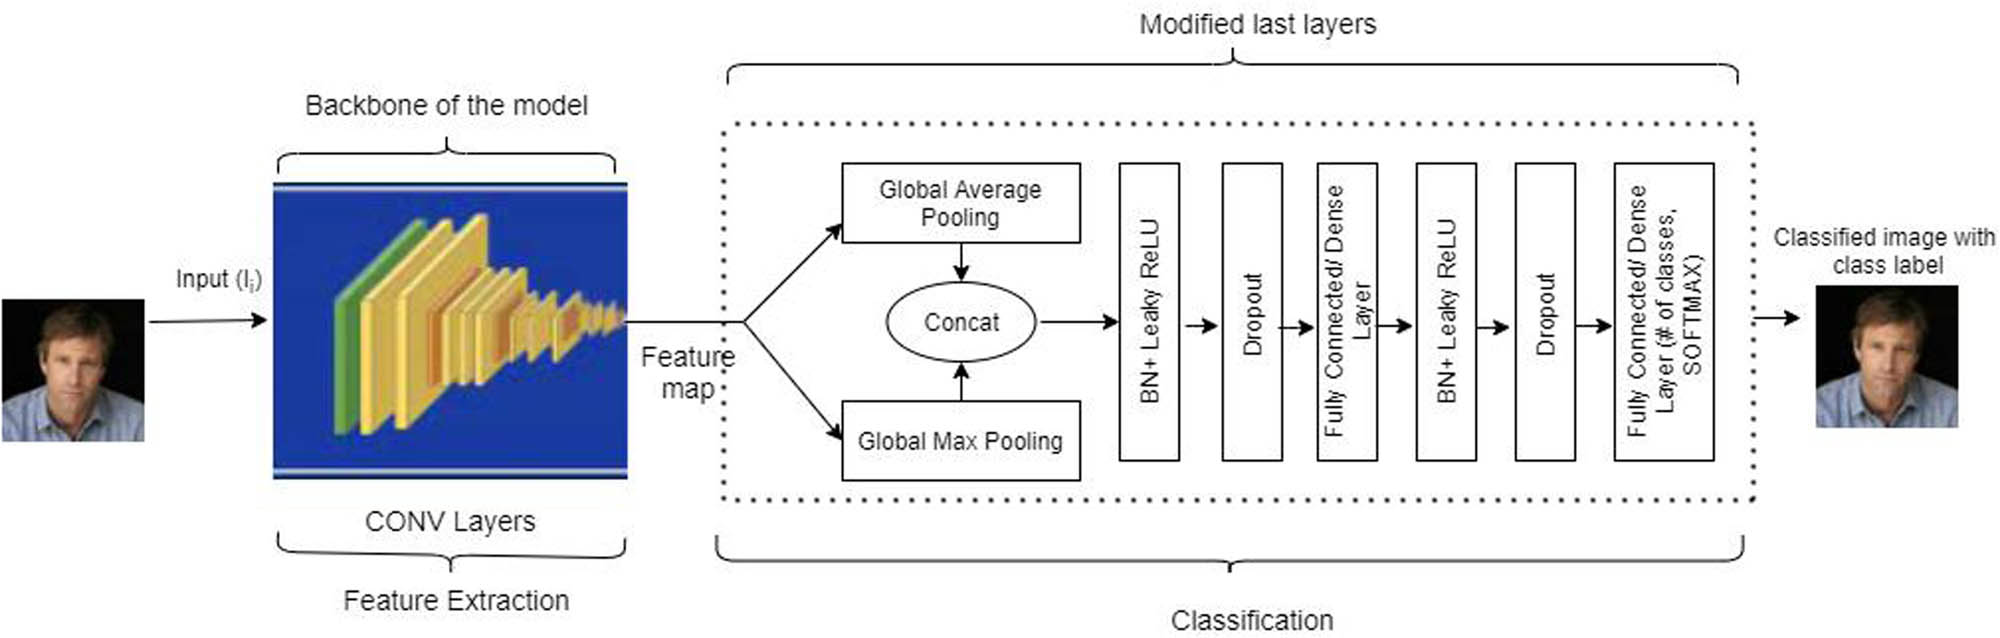 Figure 4 
                  The modified architecture of the baseline model consisting of gmp, gap, BN, dropout, and FC layers (the dotted line shows the modified part of the model).
               